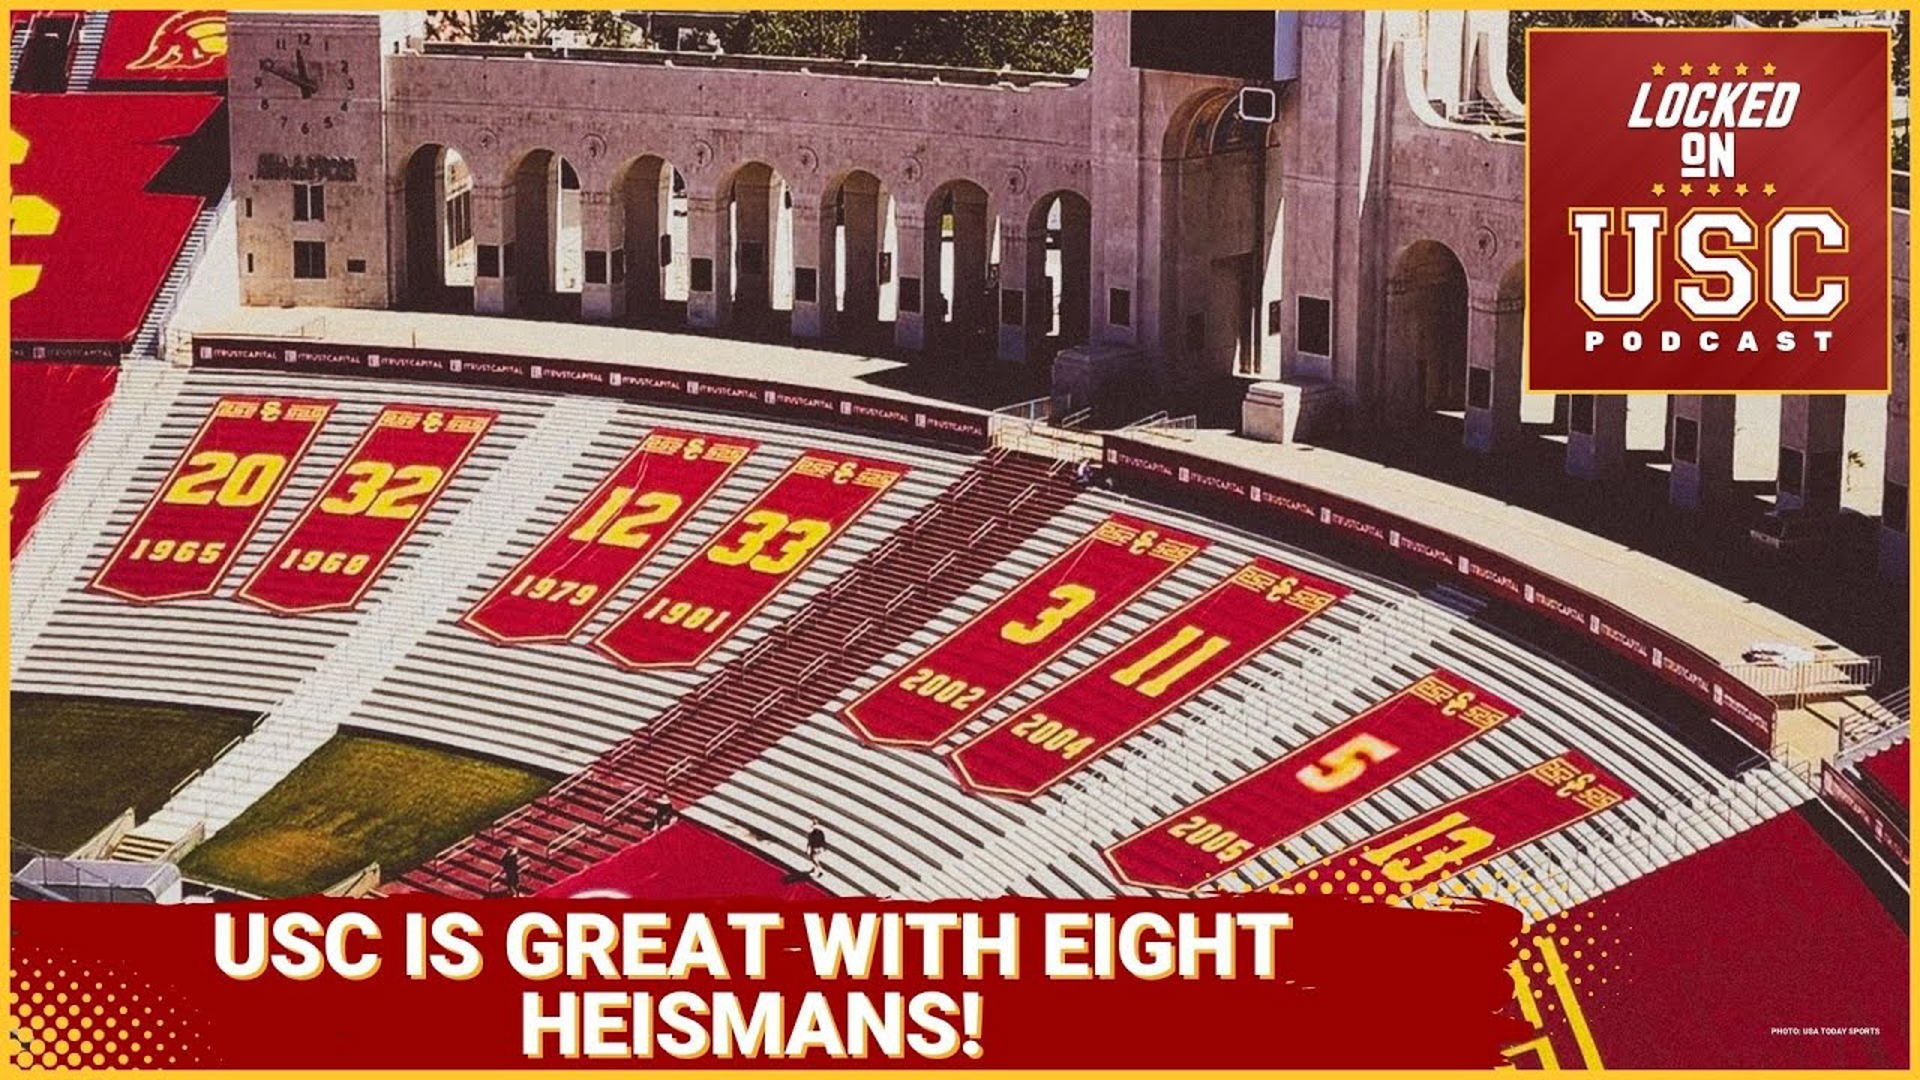 Reggie Bush got his Heisman Trophy back which means USC got its 8th Heisman Trophy returned to Heritage Hall.